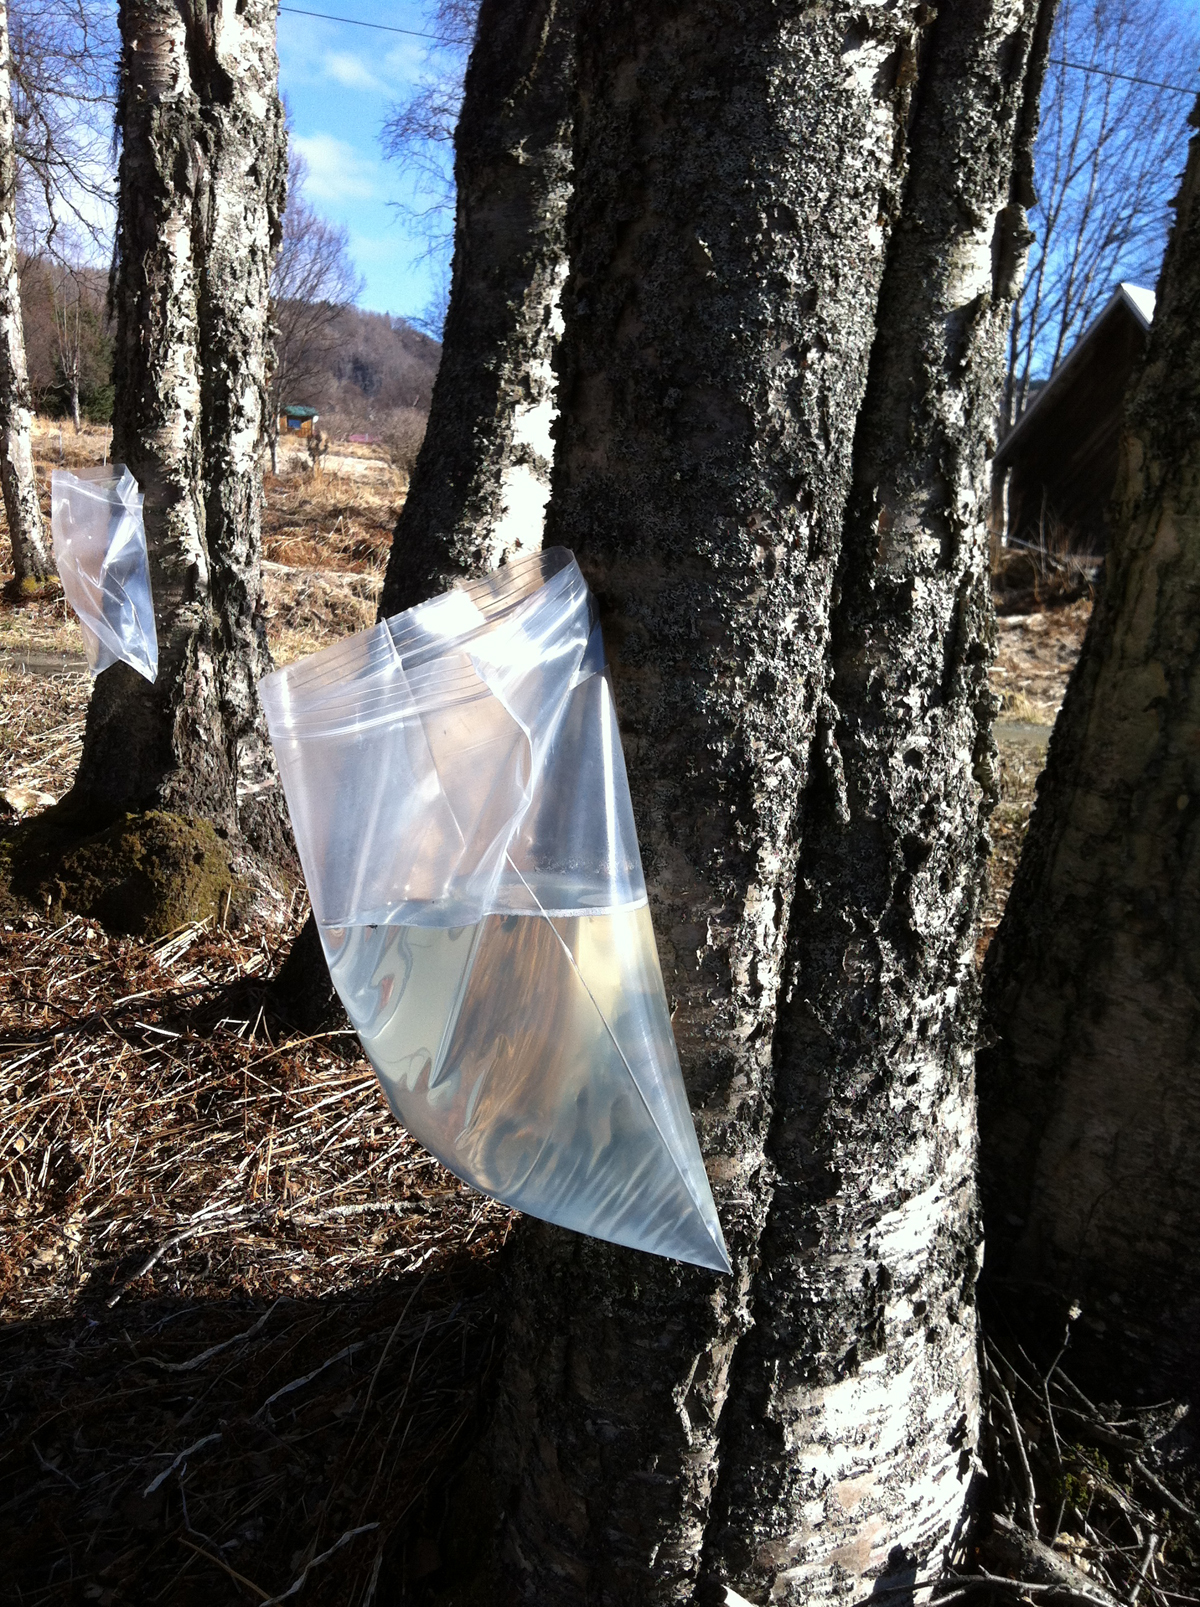 Homer couple taps trees, turning sap into flavorful syrup